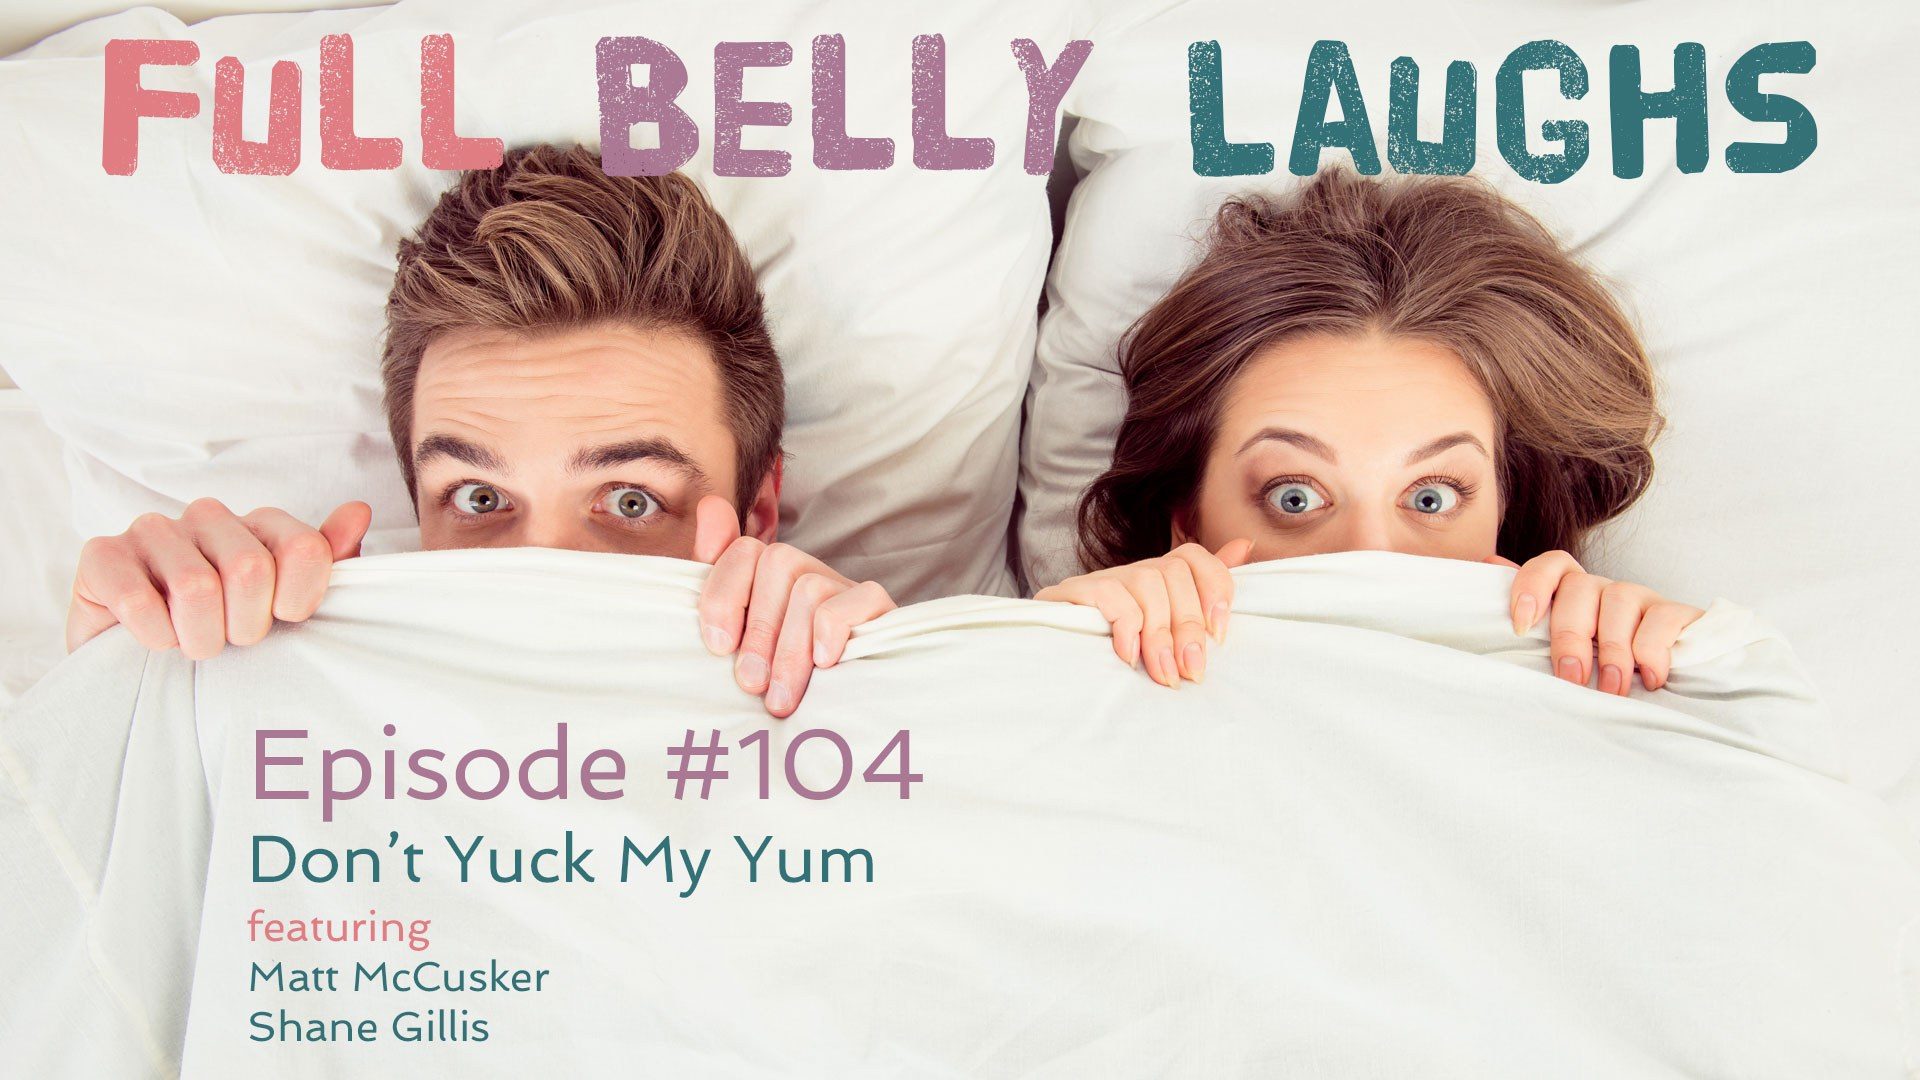 full belly laughs podcast episode 104 do not yuck my yum audio artwork